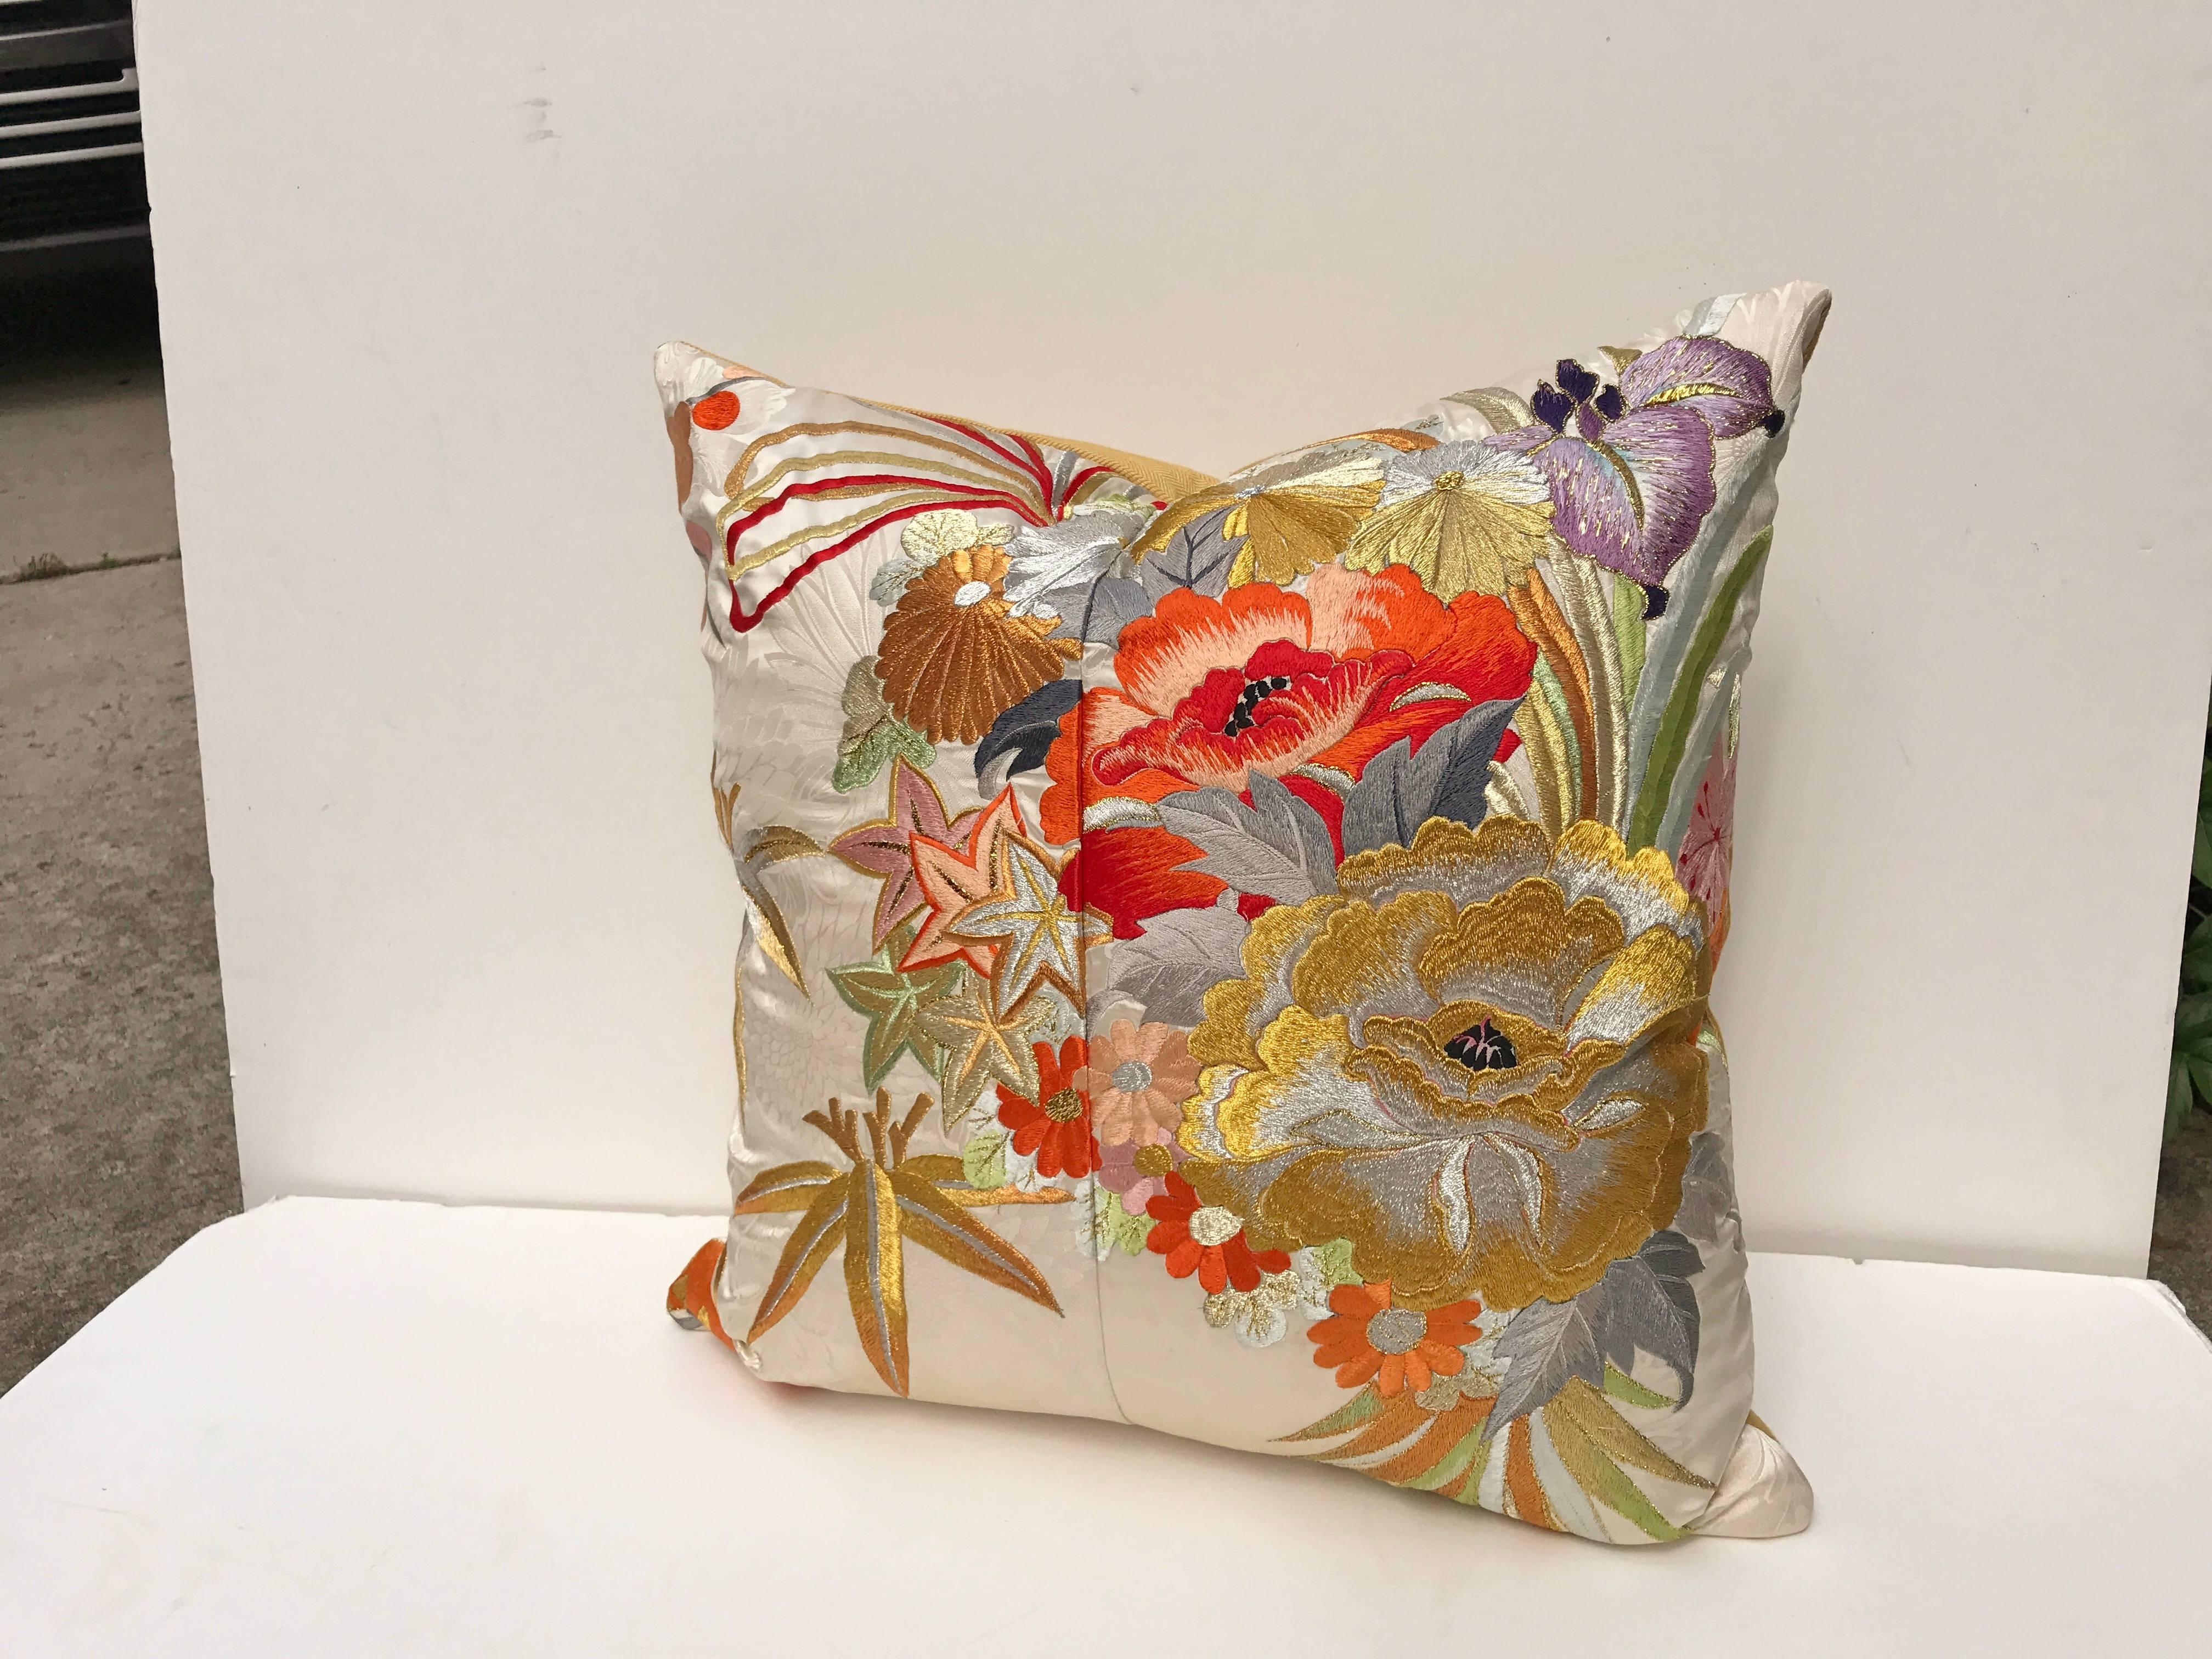 Custom pillow cut from a vintage Japanese silk uchikake, the traditional wedding kimono. The ivory silk is embroidered with vibrant silk and metallic threads. Pillow is backed in a soft gold silk, filled with an insert of 50/50 down and feathers and